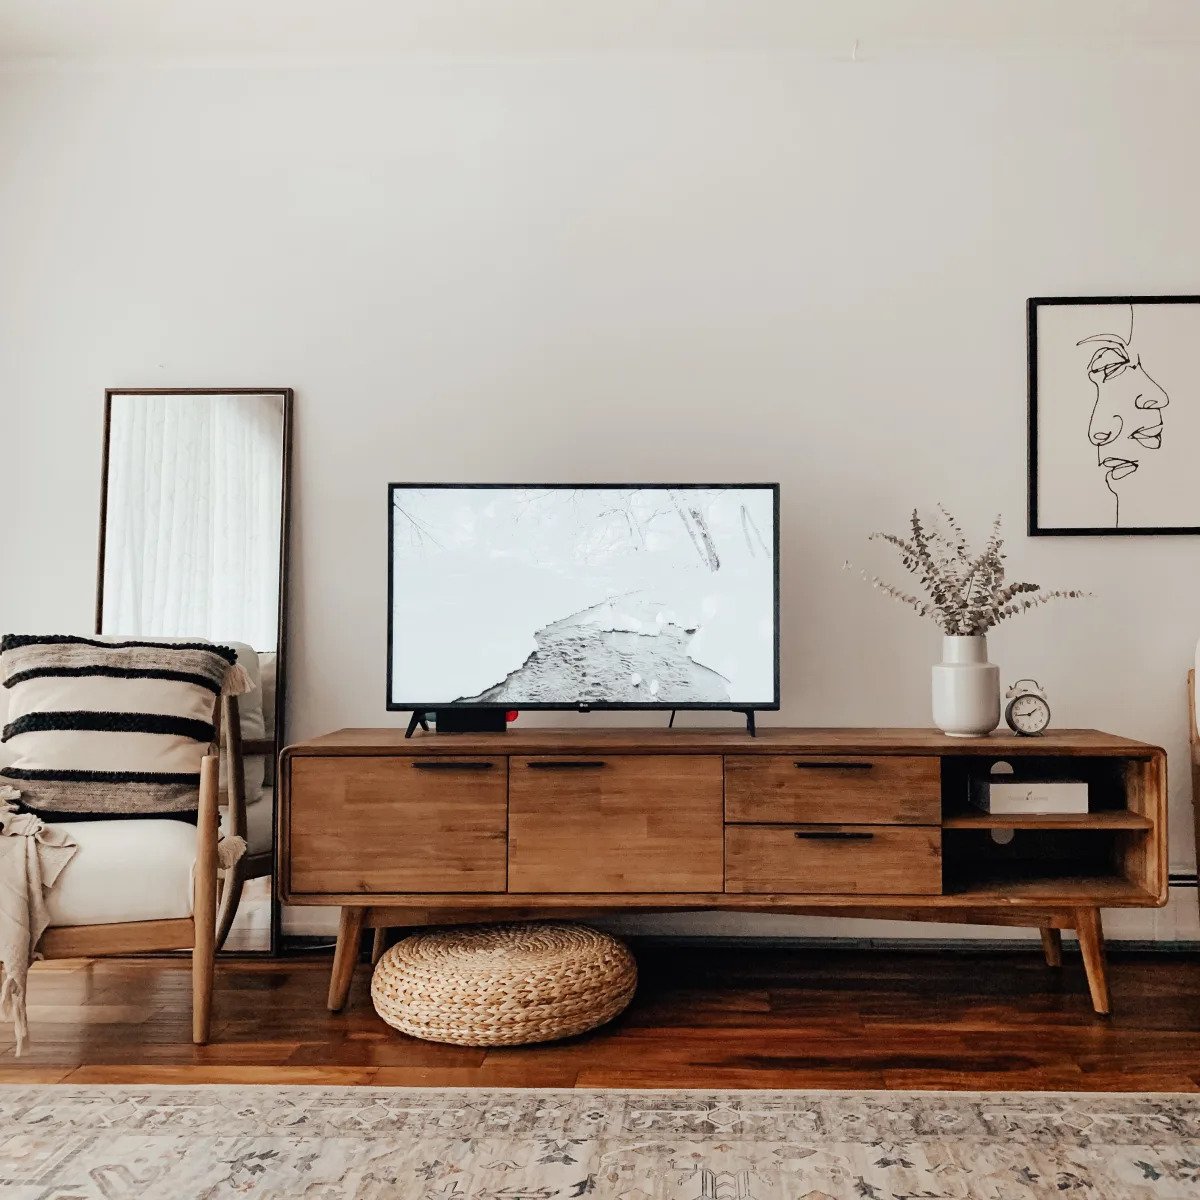 How To Decorate A TV Stand